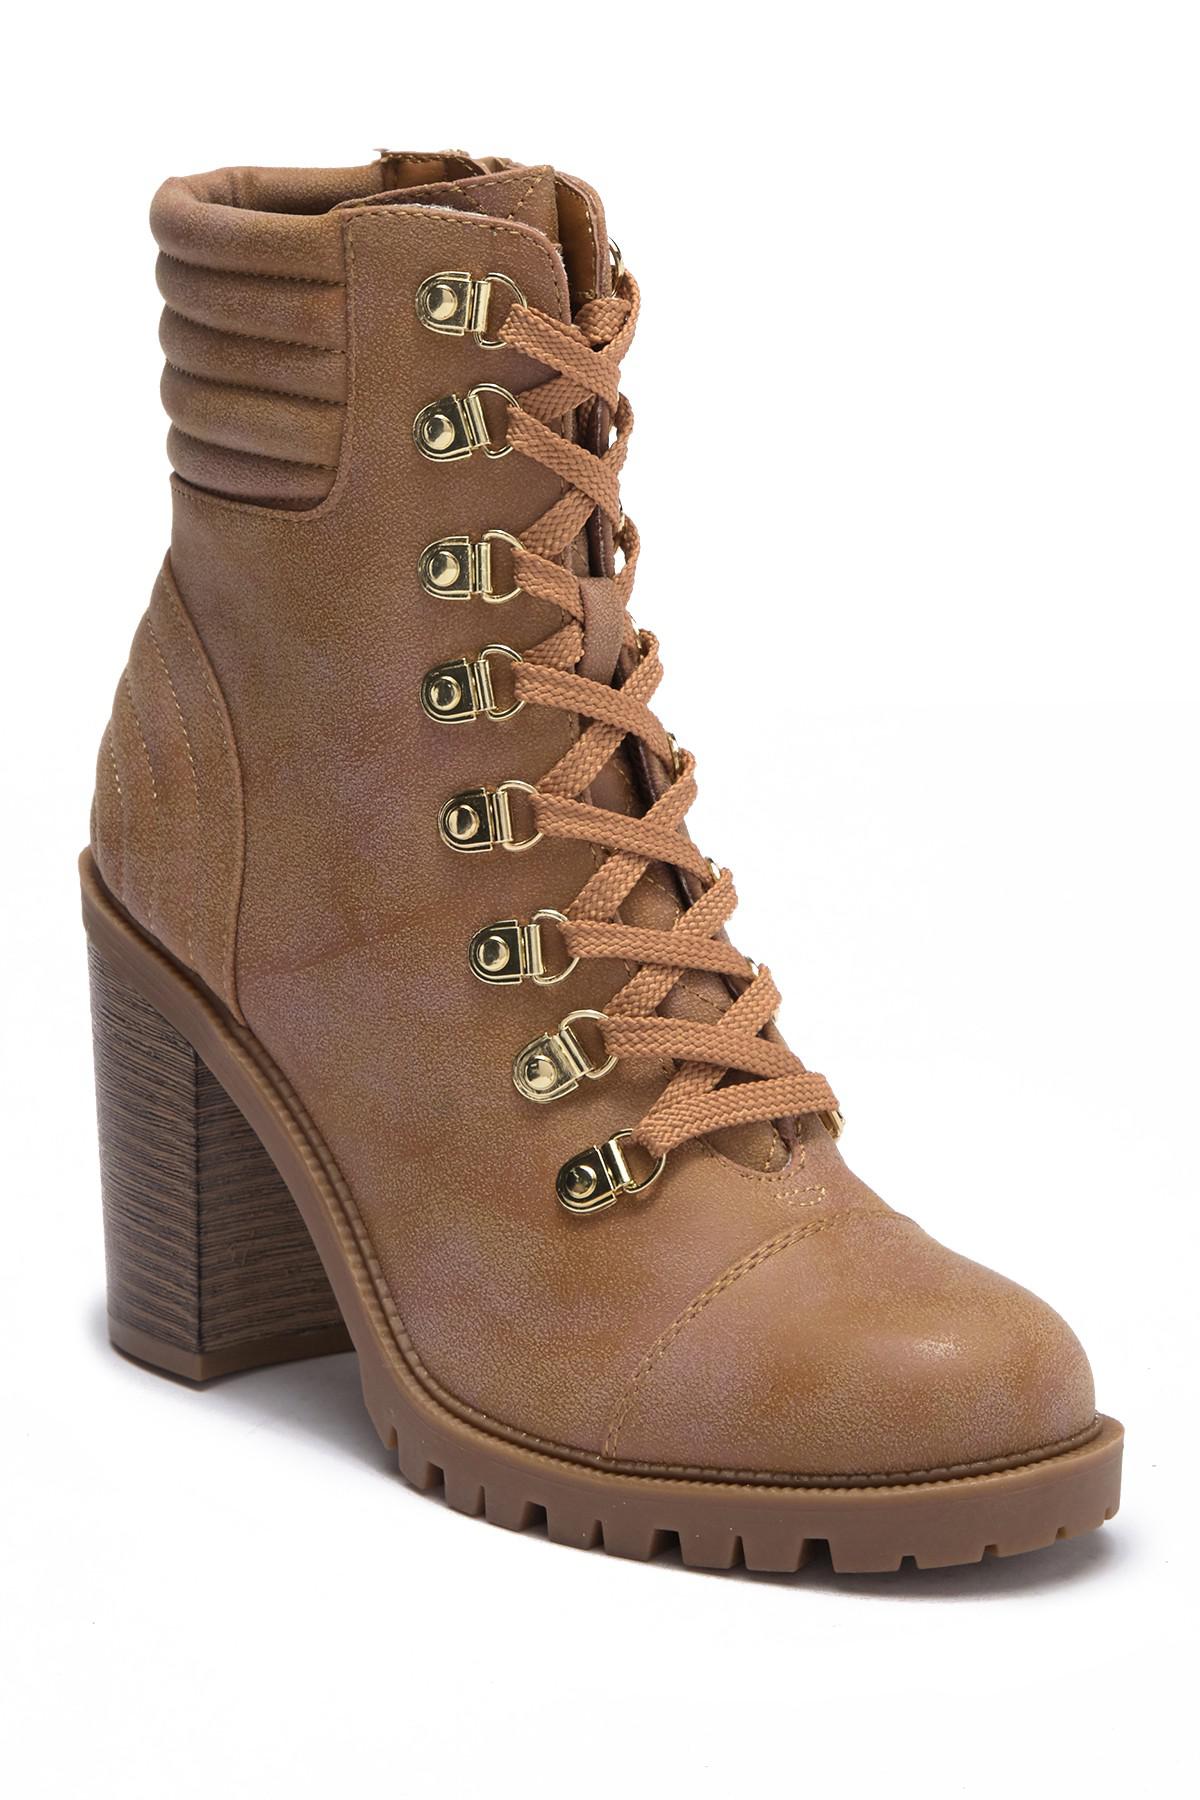 G by Guess Jetti Combat Boot in Brown 